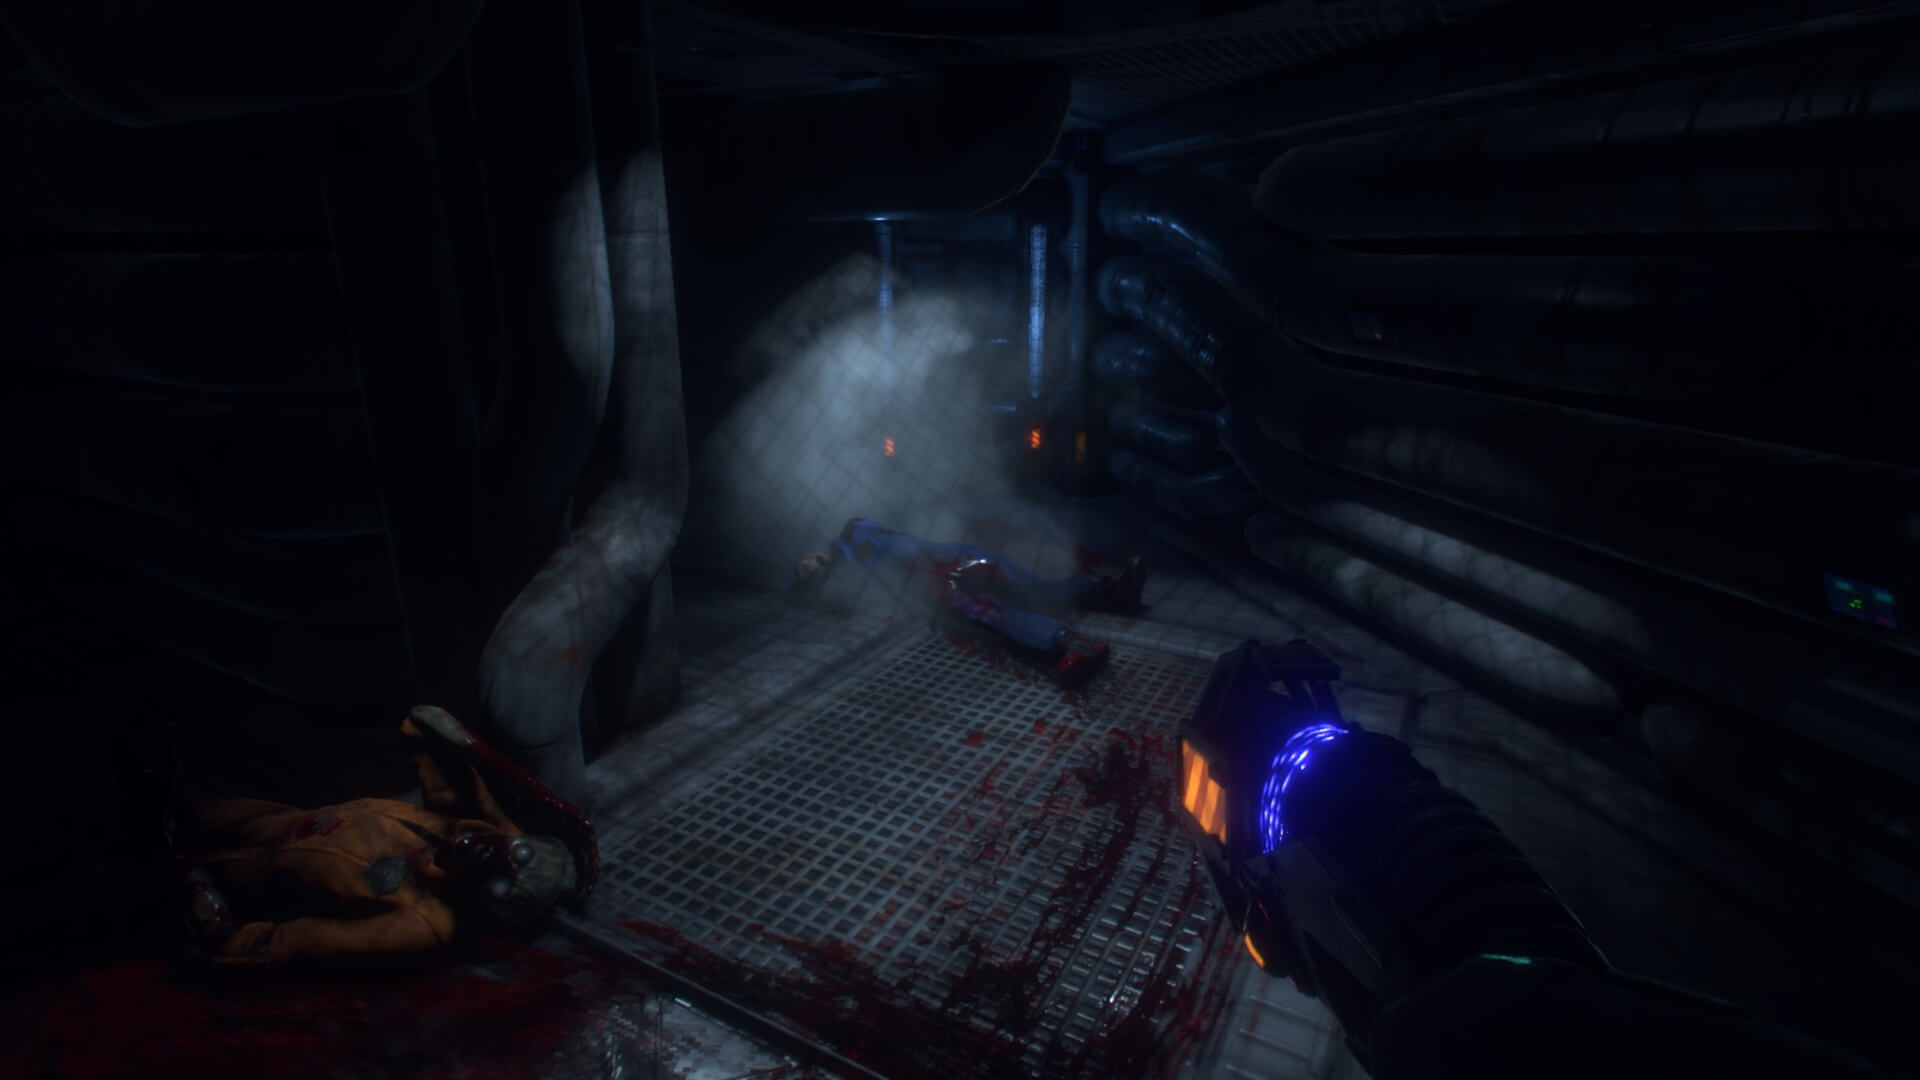 The persistance game system shock